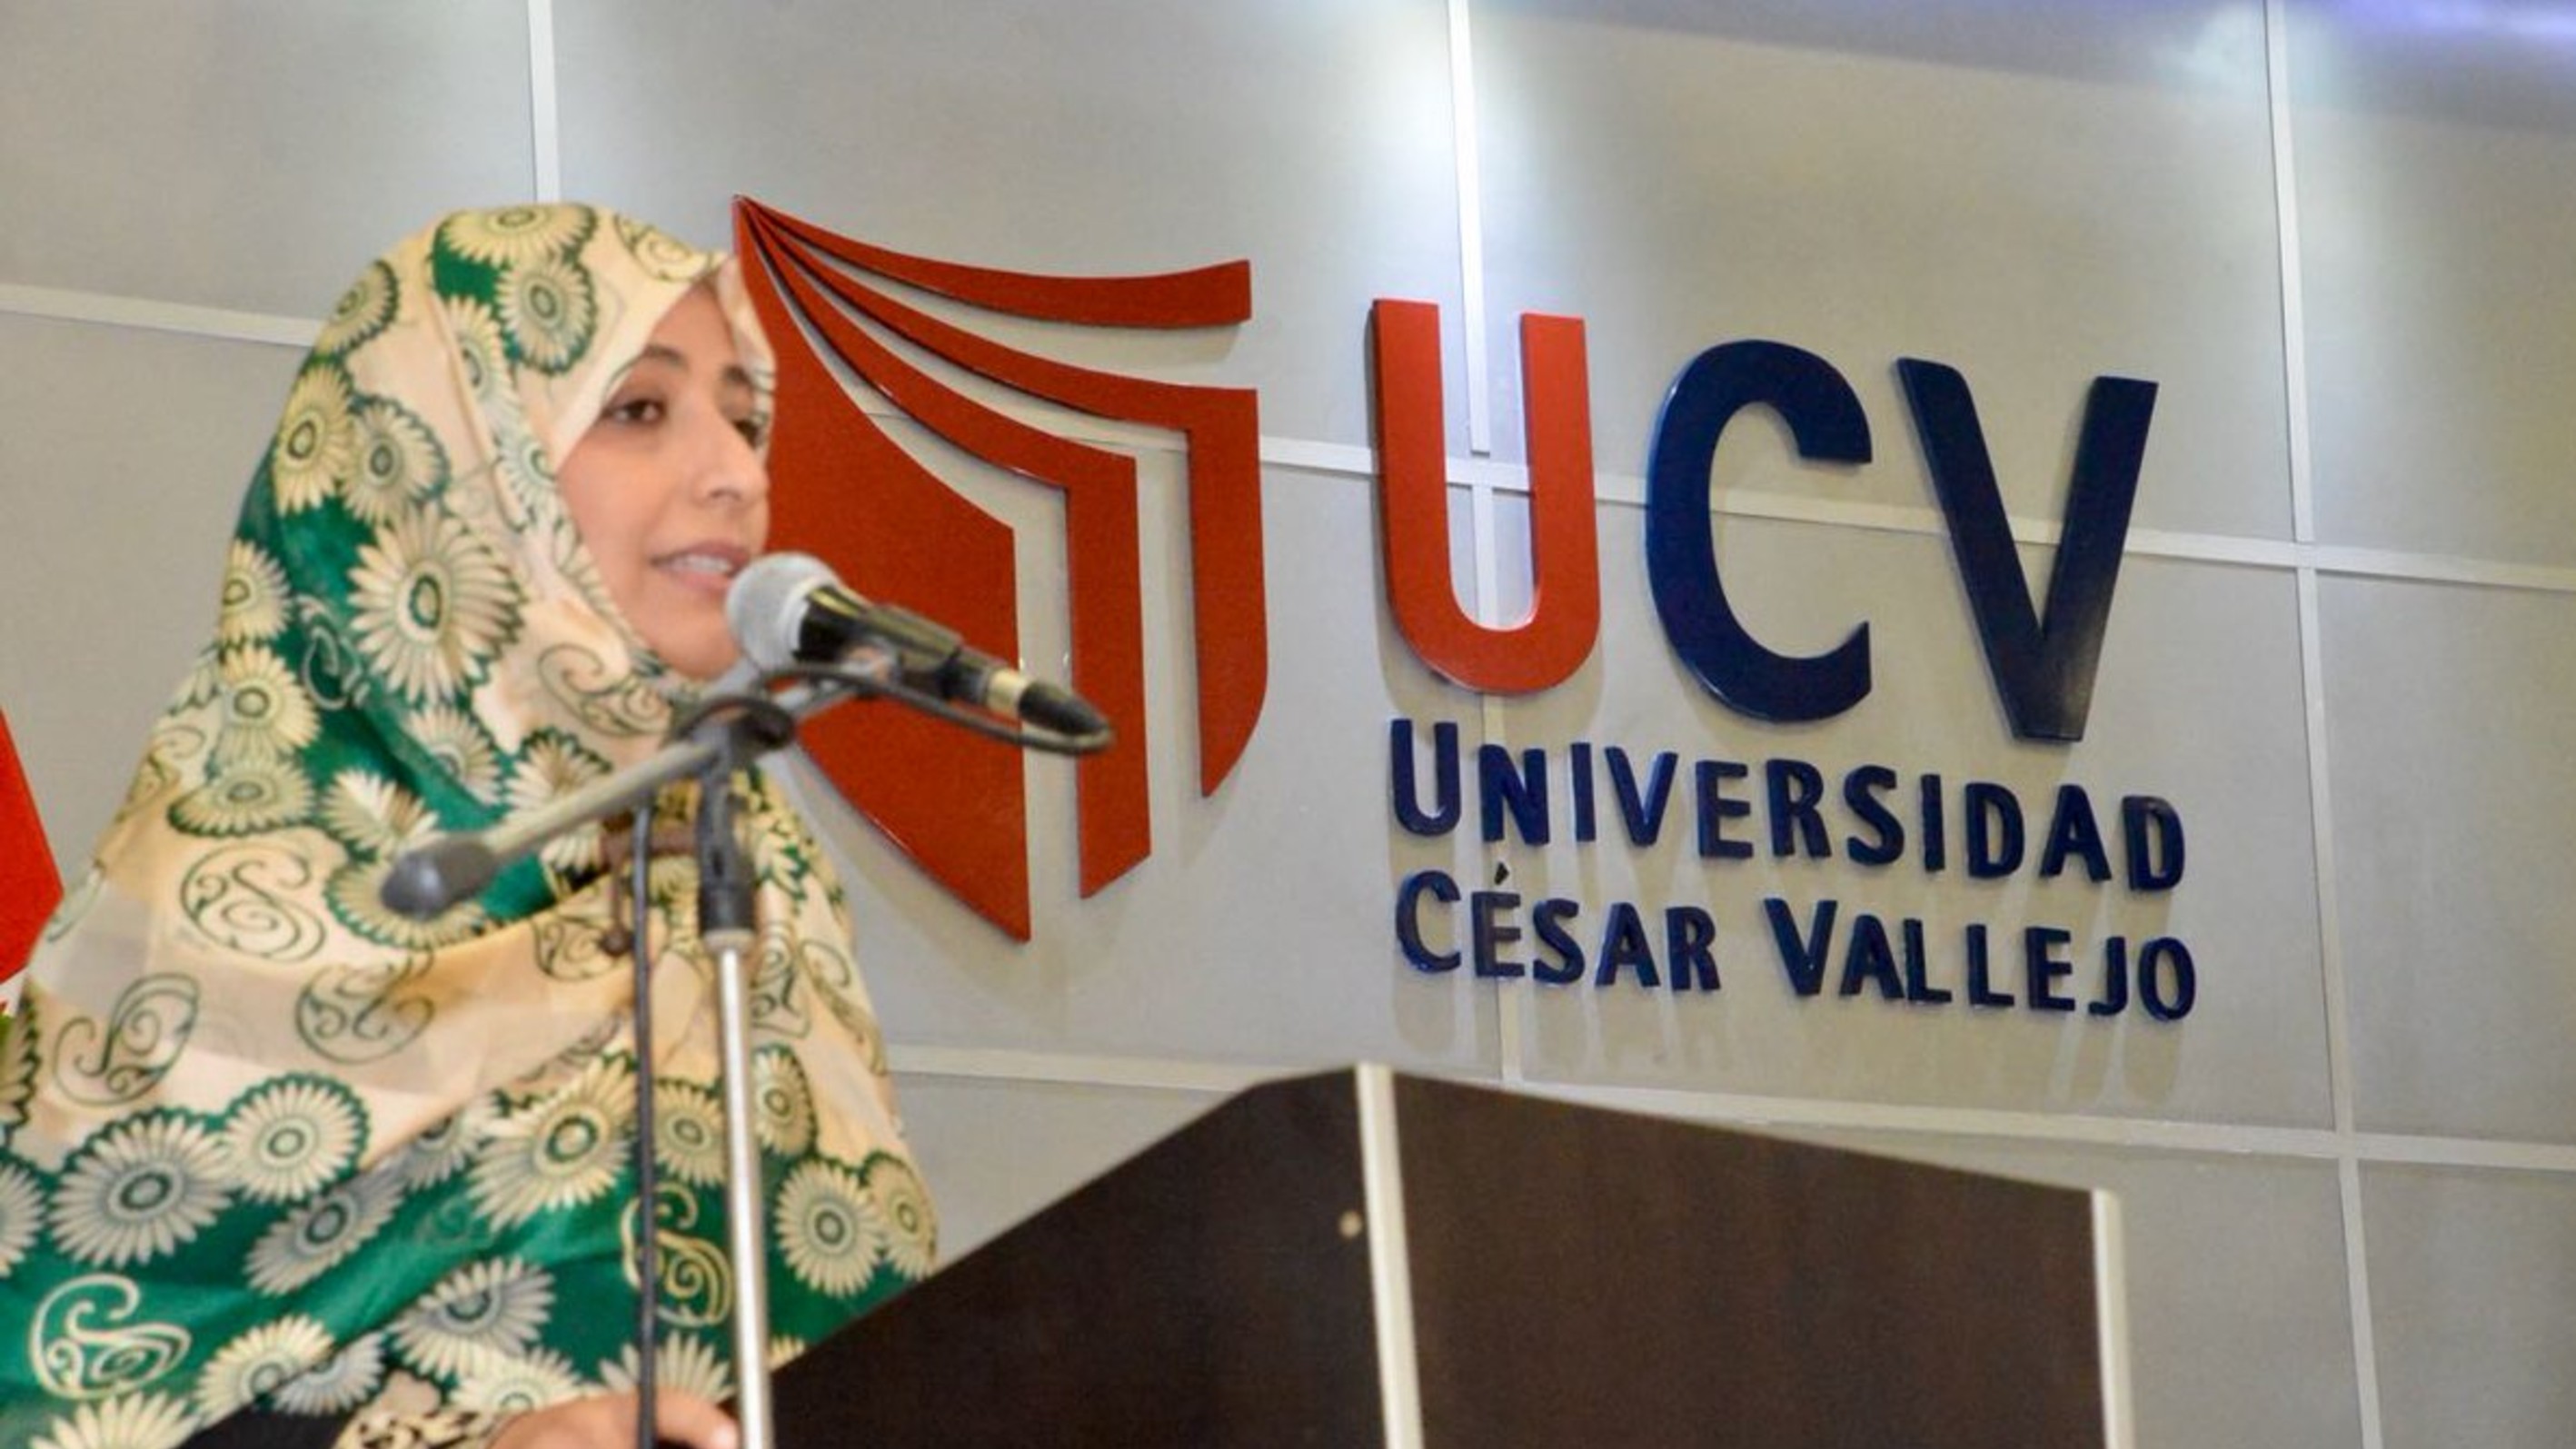 Mrs. Tawakkol Karman’s speech during ceremony to receive her honorary doctorate from University of Cesar Vallejo in Peru